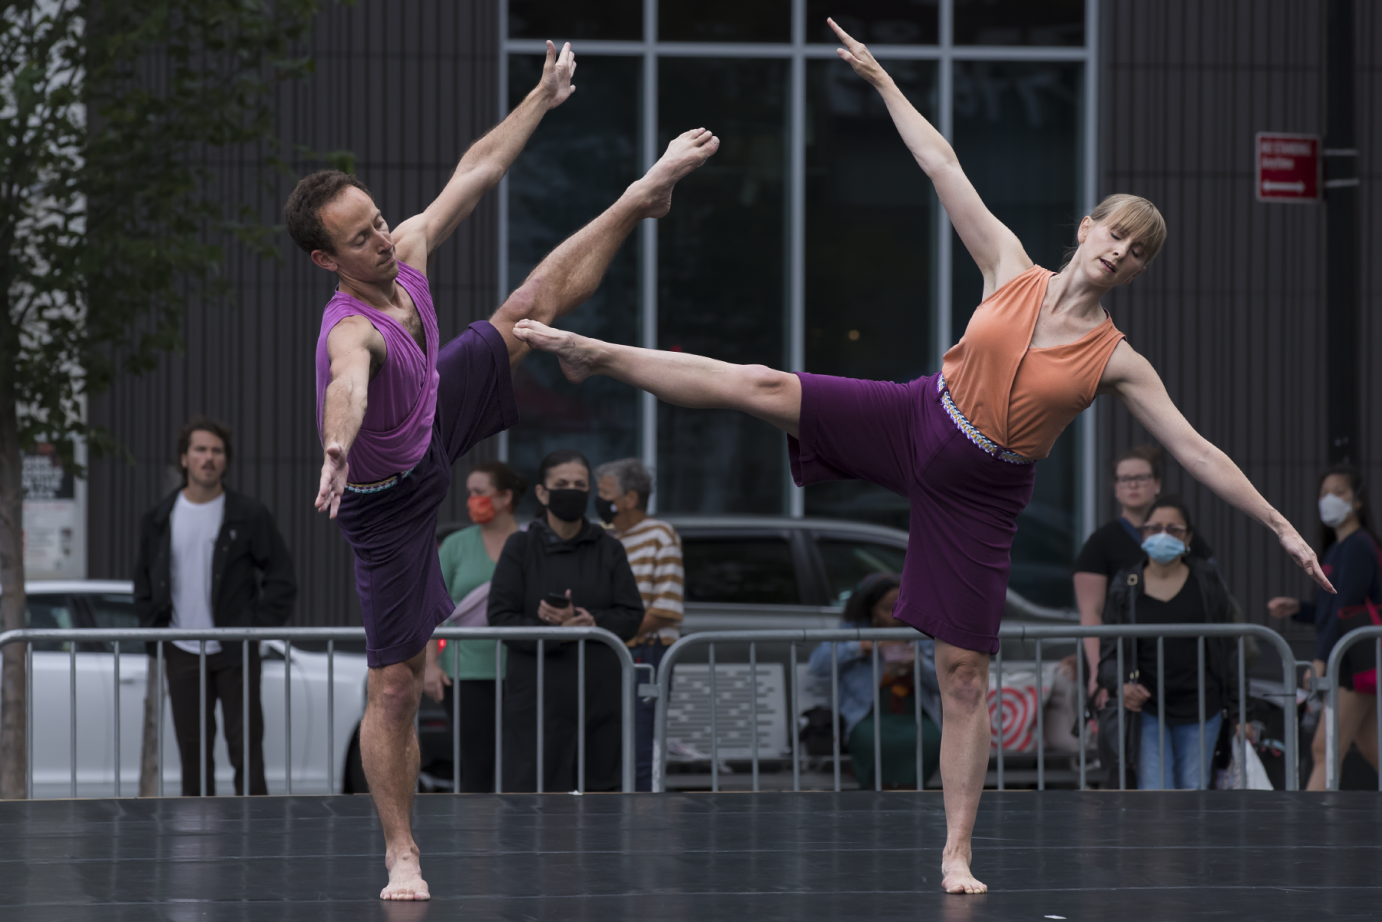 a man and woman dancer both in purple shorts and sleeveless tops stand on one leg tilting to the side with their free leg aiming high into the air